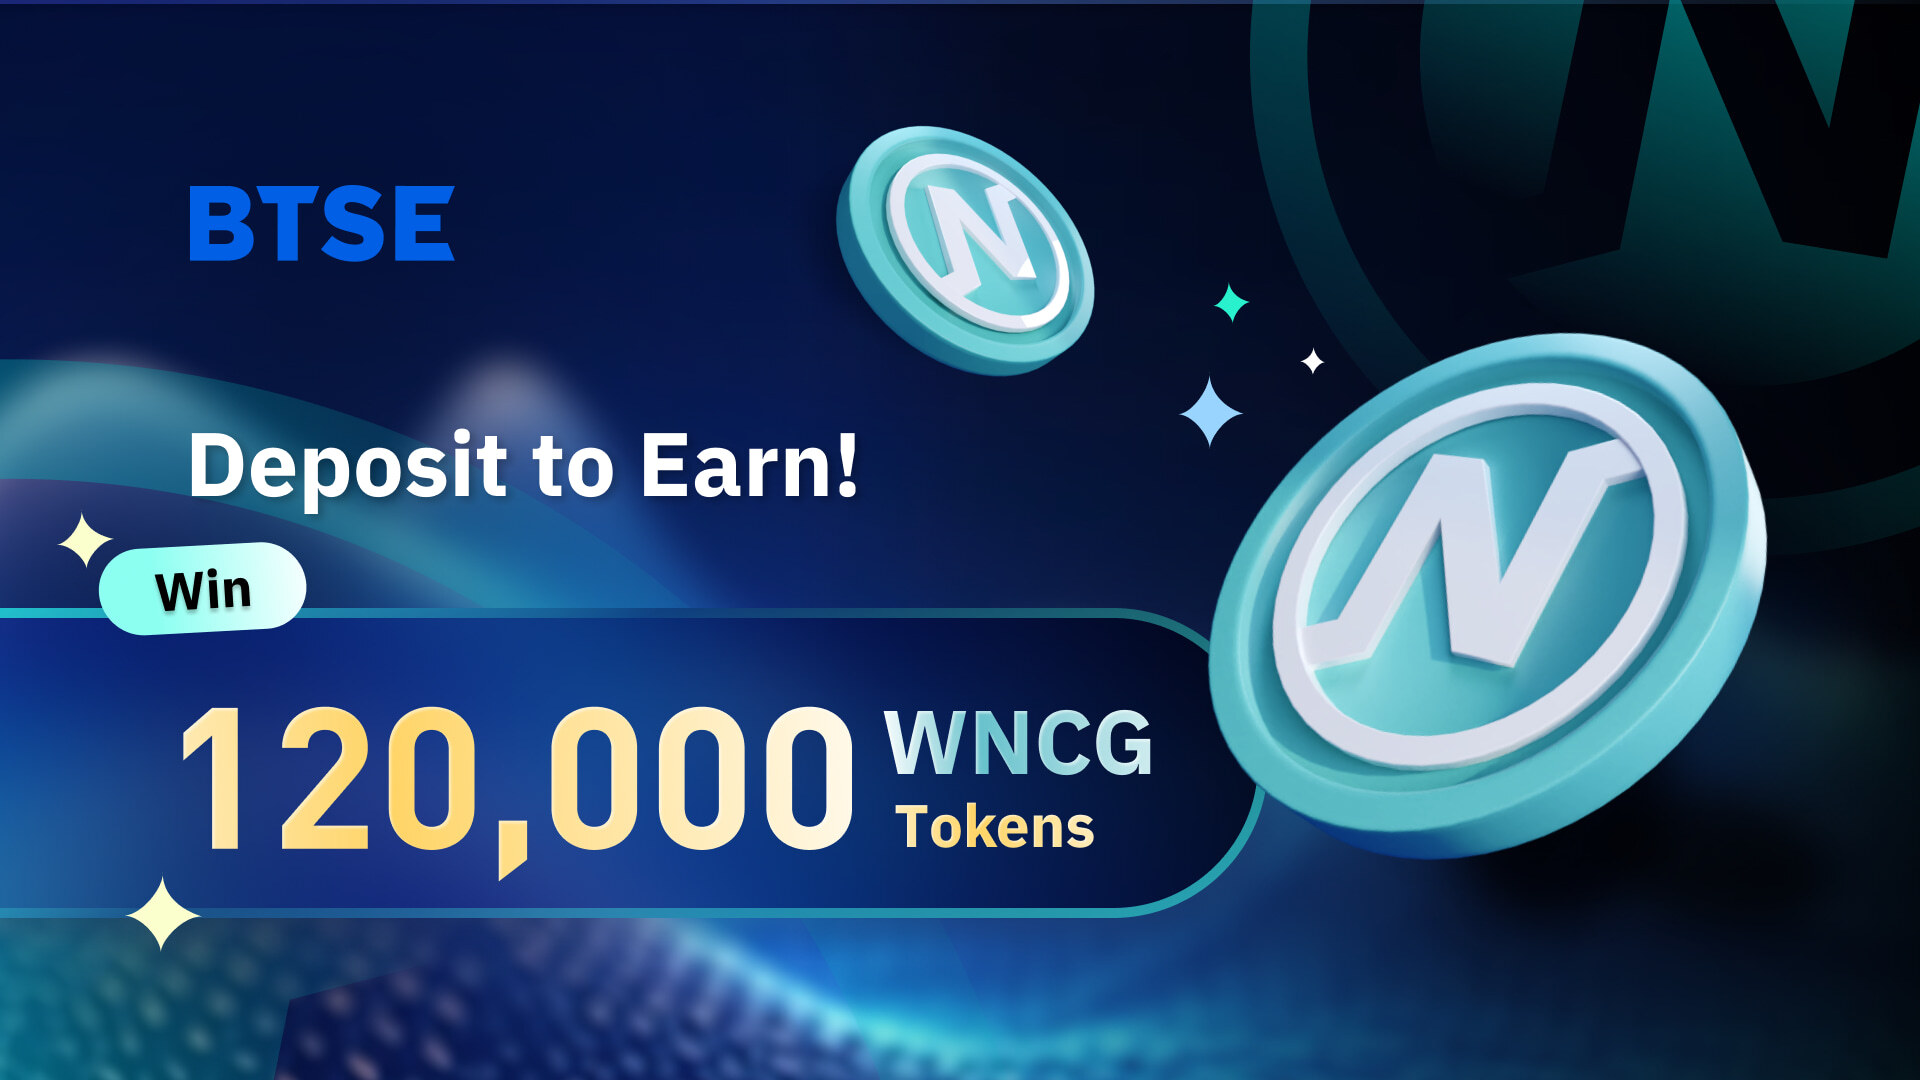 Deposit, Win, Celebrate: BTSE Welcomes WNCG with Token Giveaway!